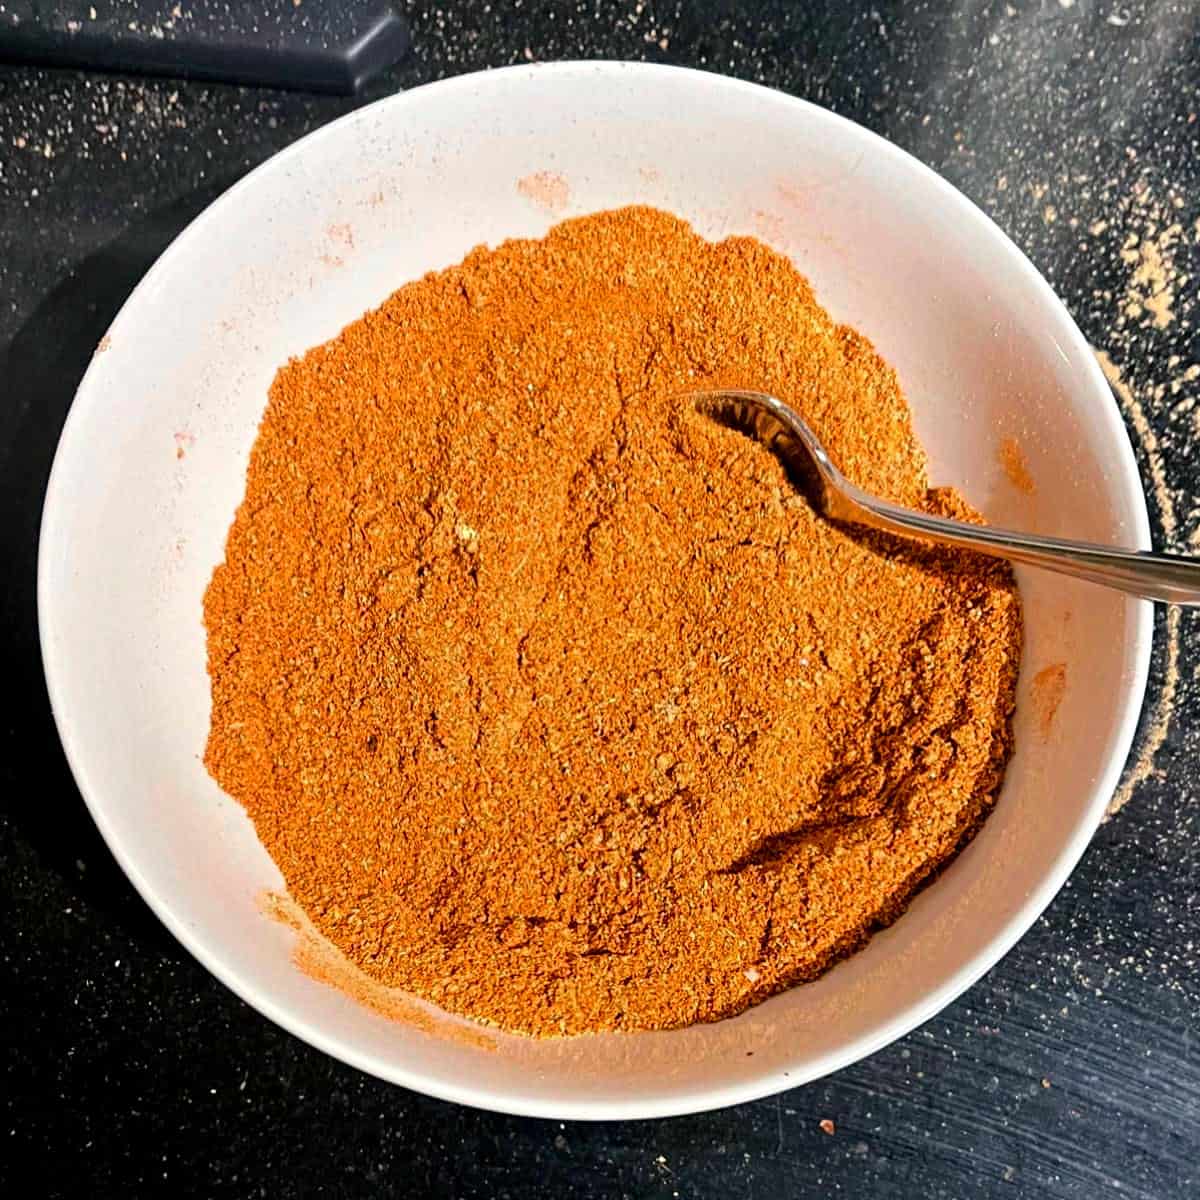 Berbere spice blend in white bowl with spoon.